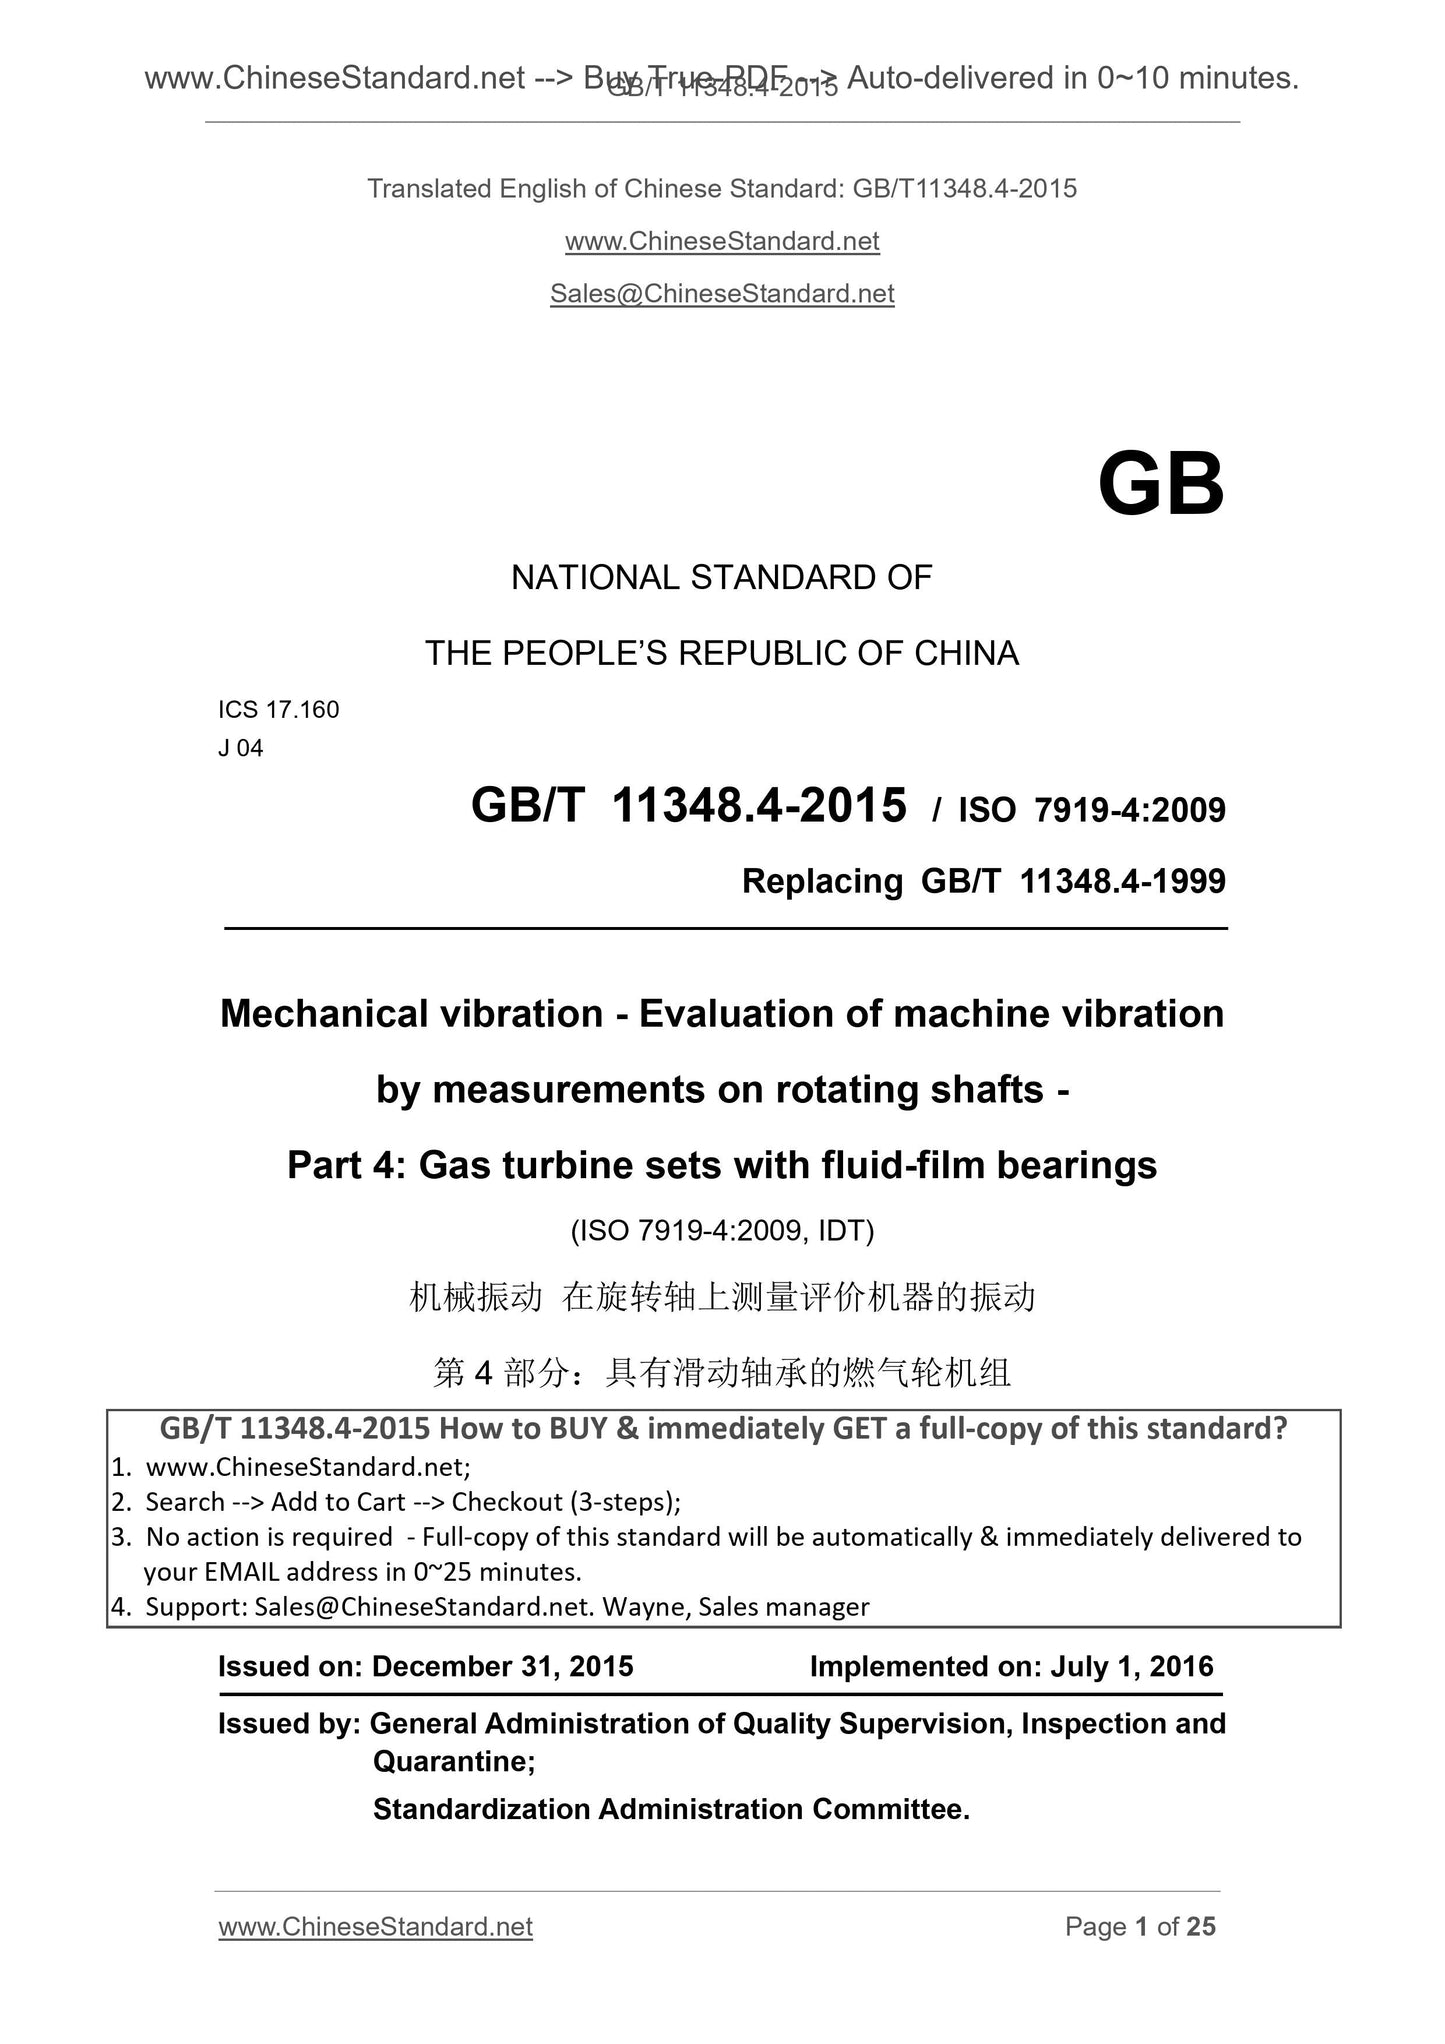 GB/T 11348.4-2015 Page 1